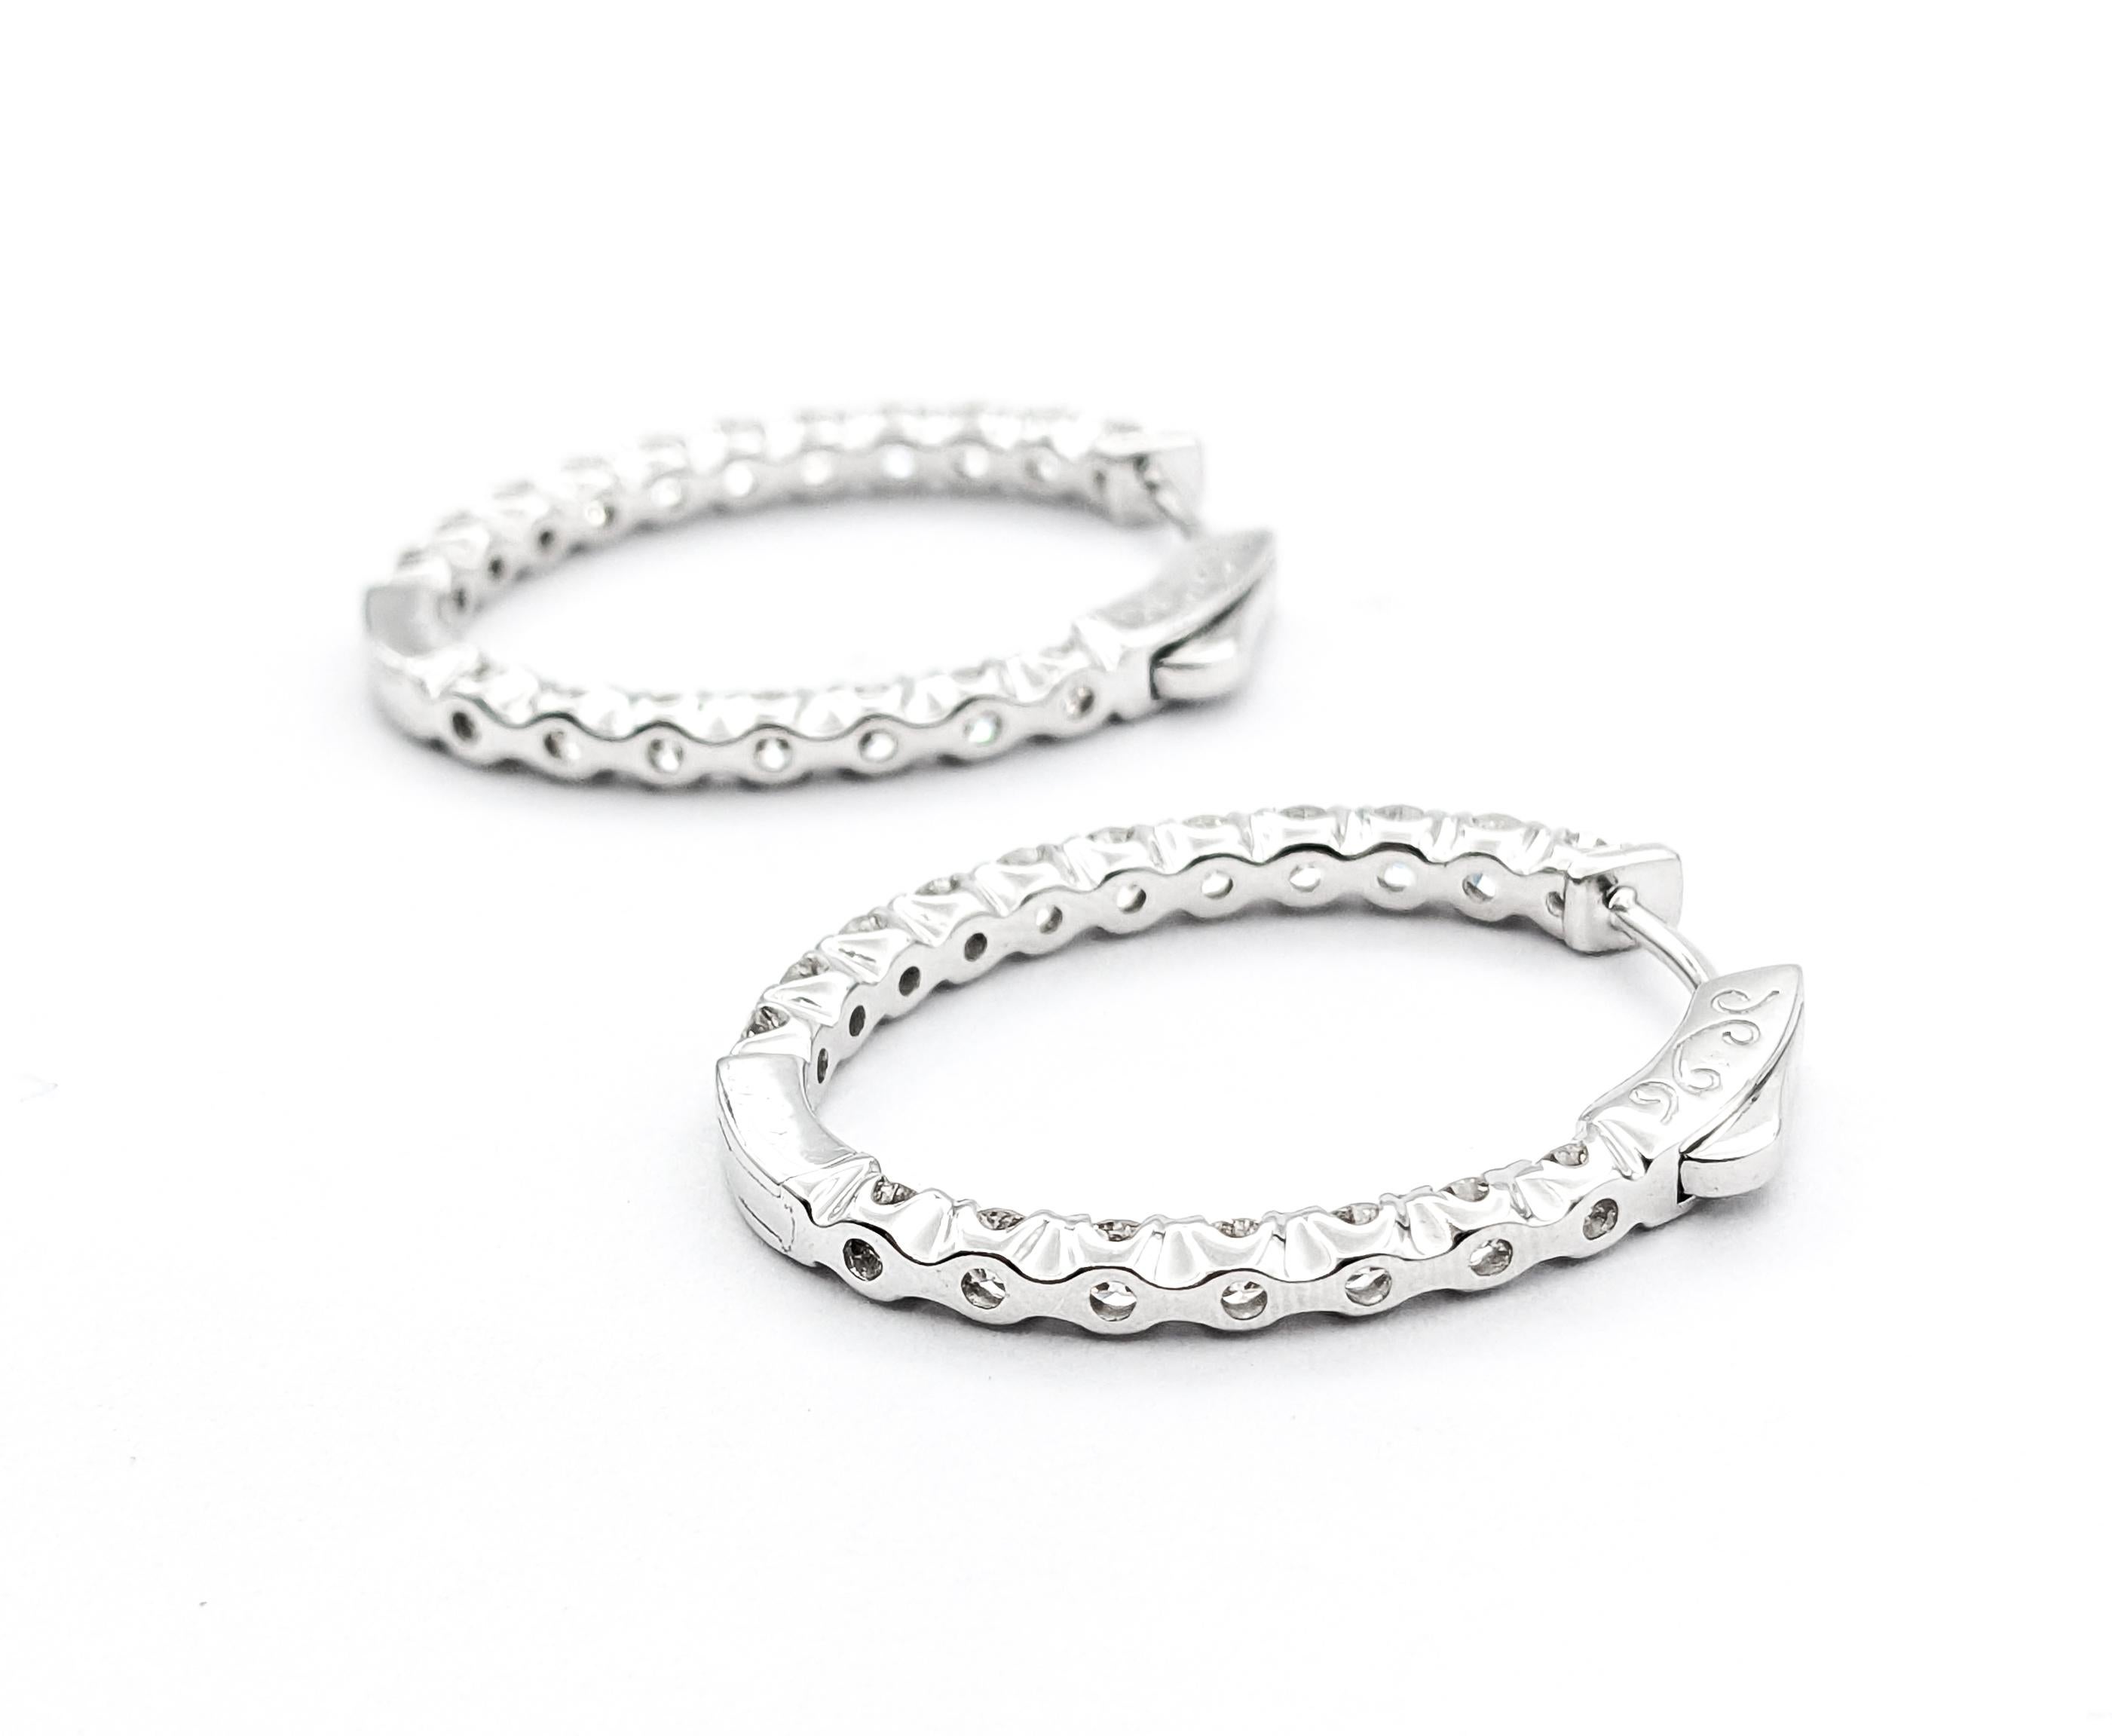 2.87ctw inside/outside Diamond Hoop Fashion Earrings In White Gold


Introducing these sophisticated Diamond Fashion Earrings, masterfully crafted in 14kt White Gold. These earrings display an impressive 2.87ctw of diamonds, offering SI clarity and